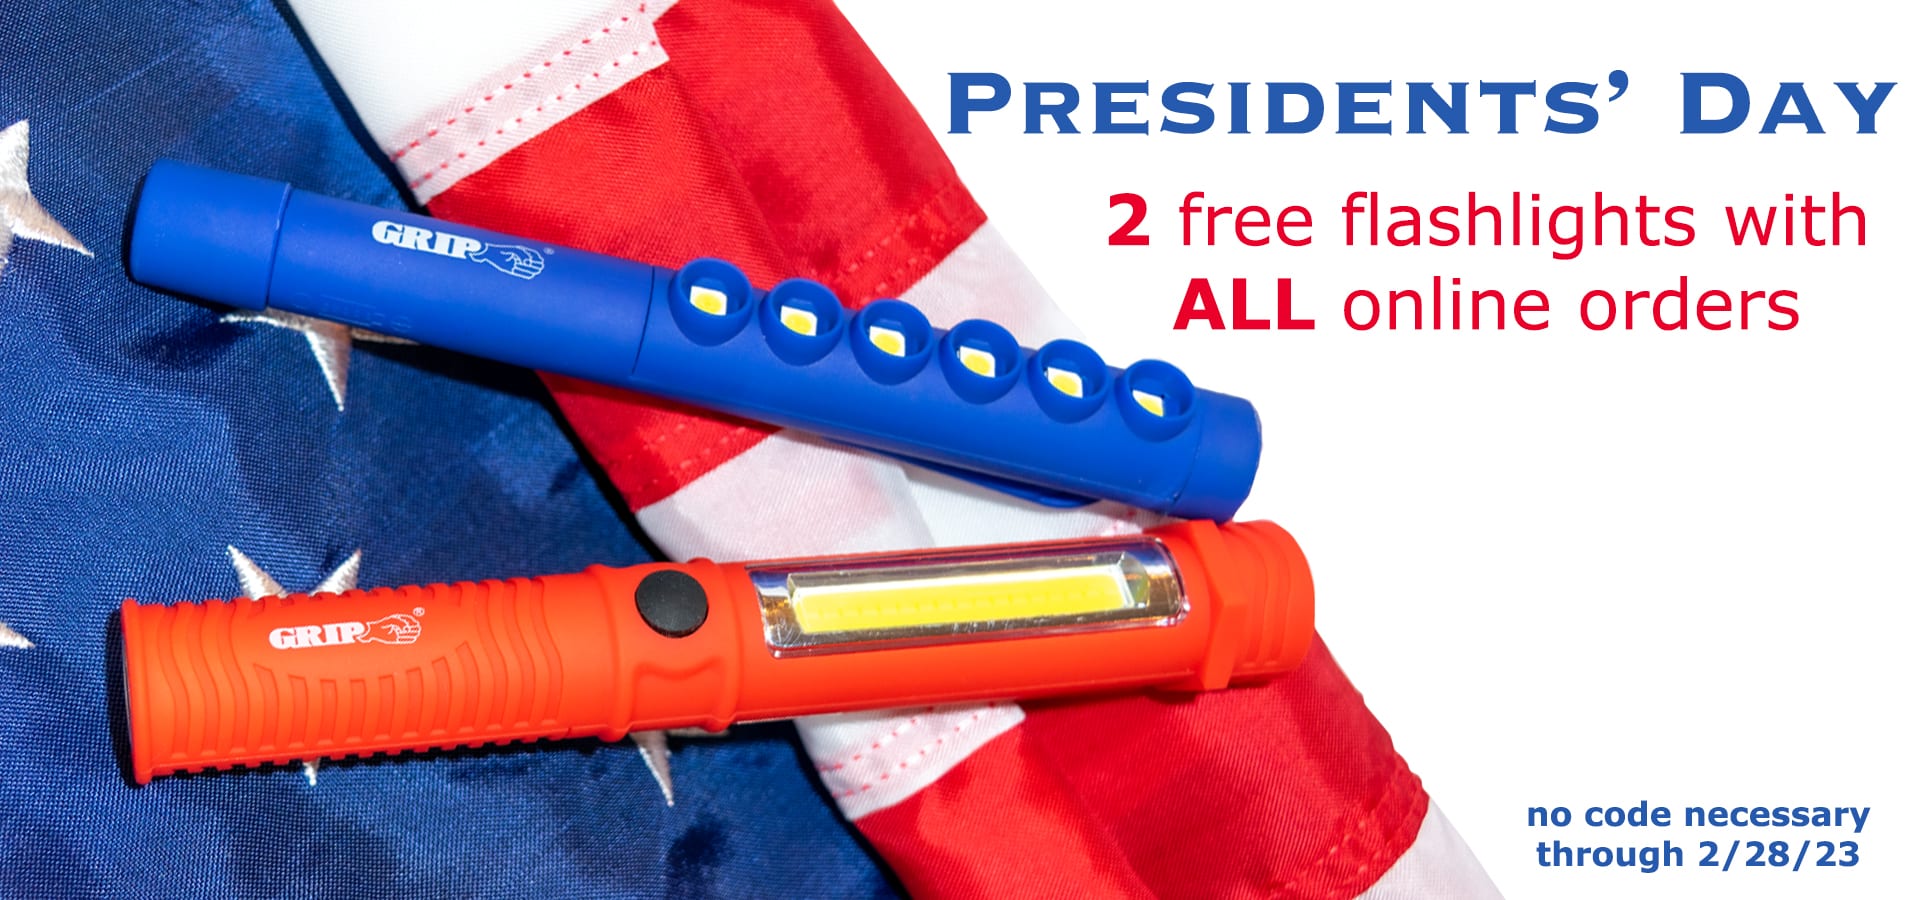 Presidents Day Offer  2 free FLASHLIGHTS with all online orders  no code necessary through 2/28/23